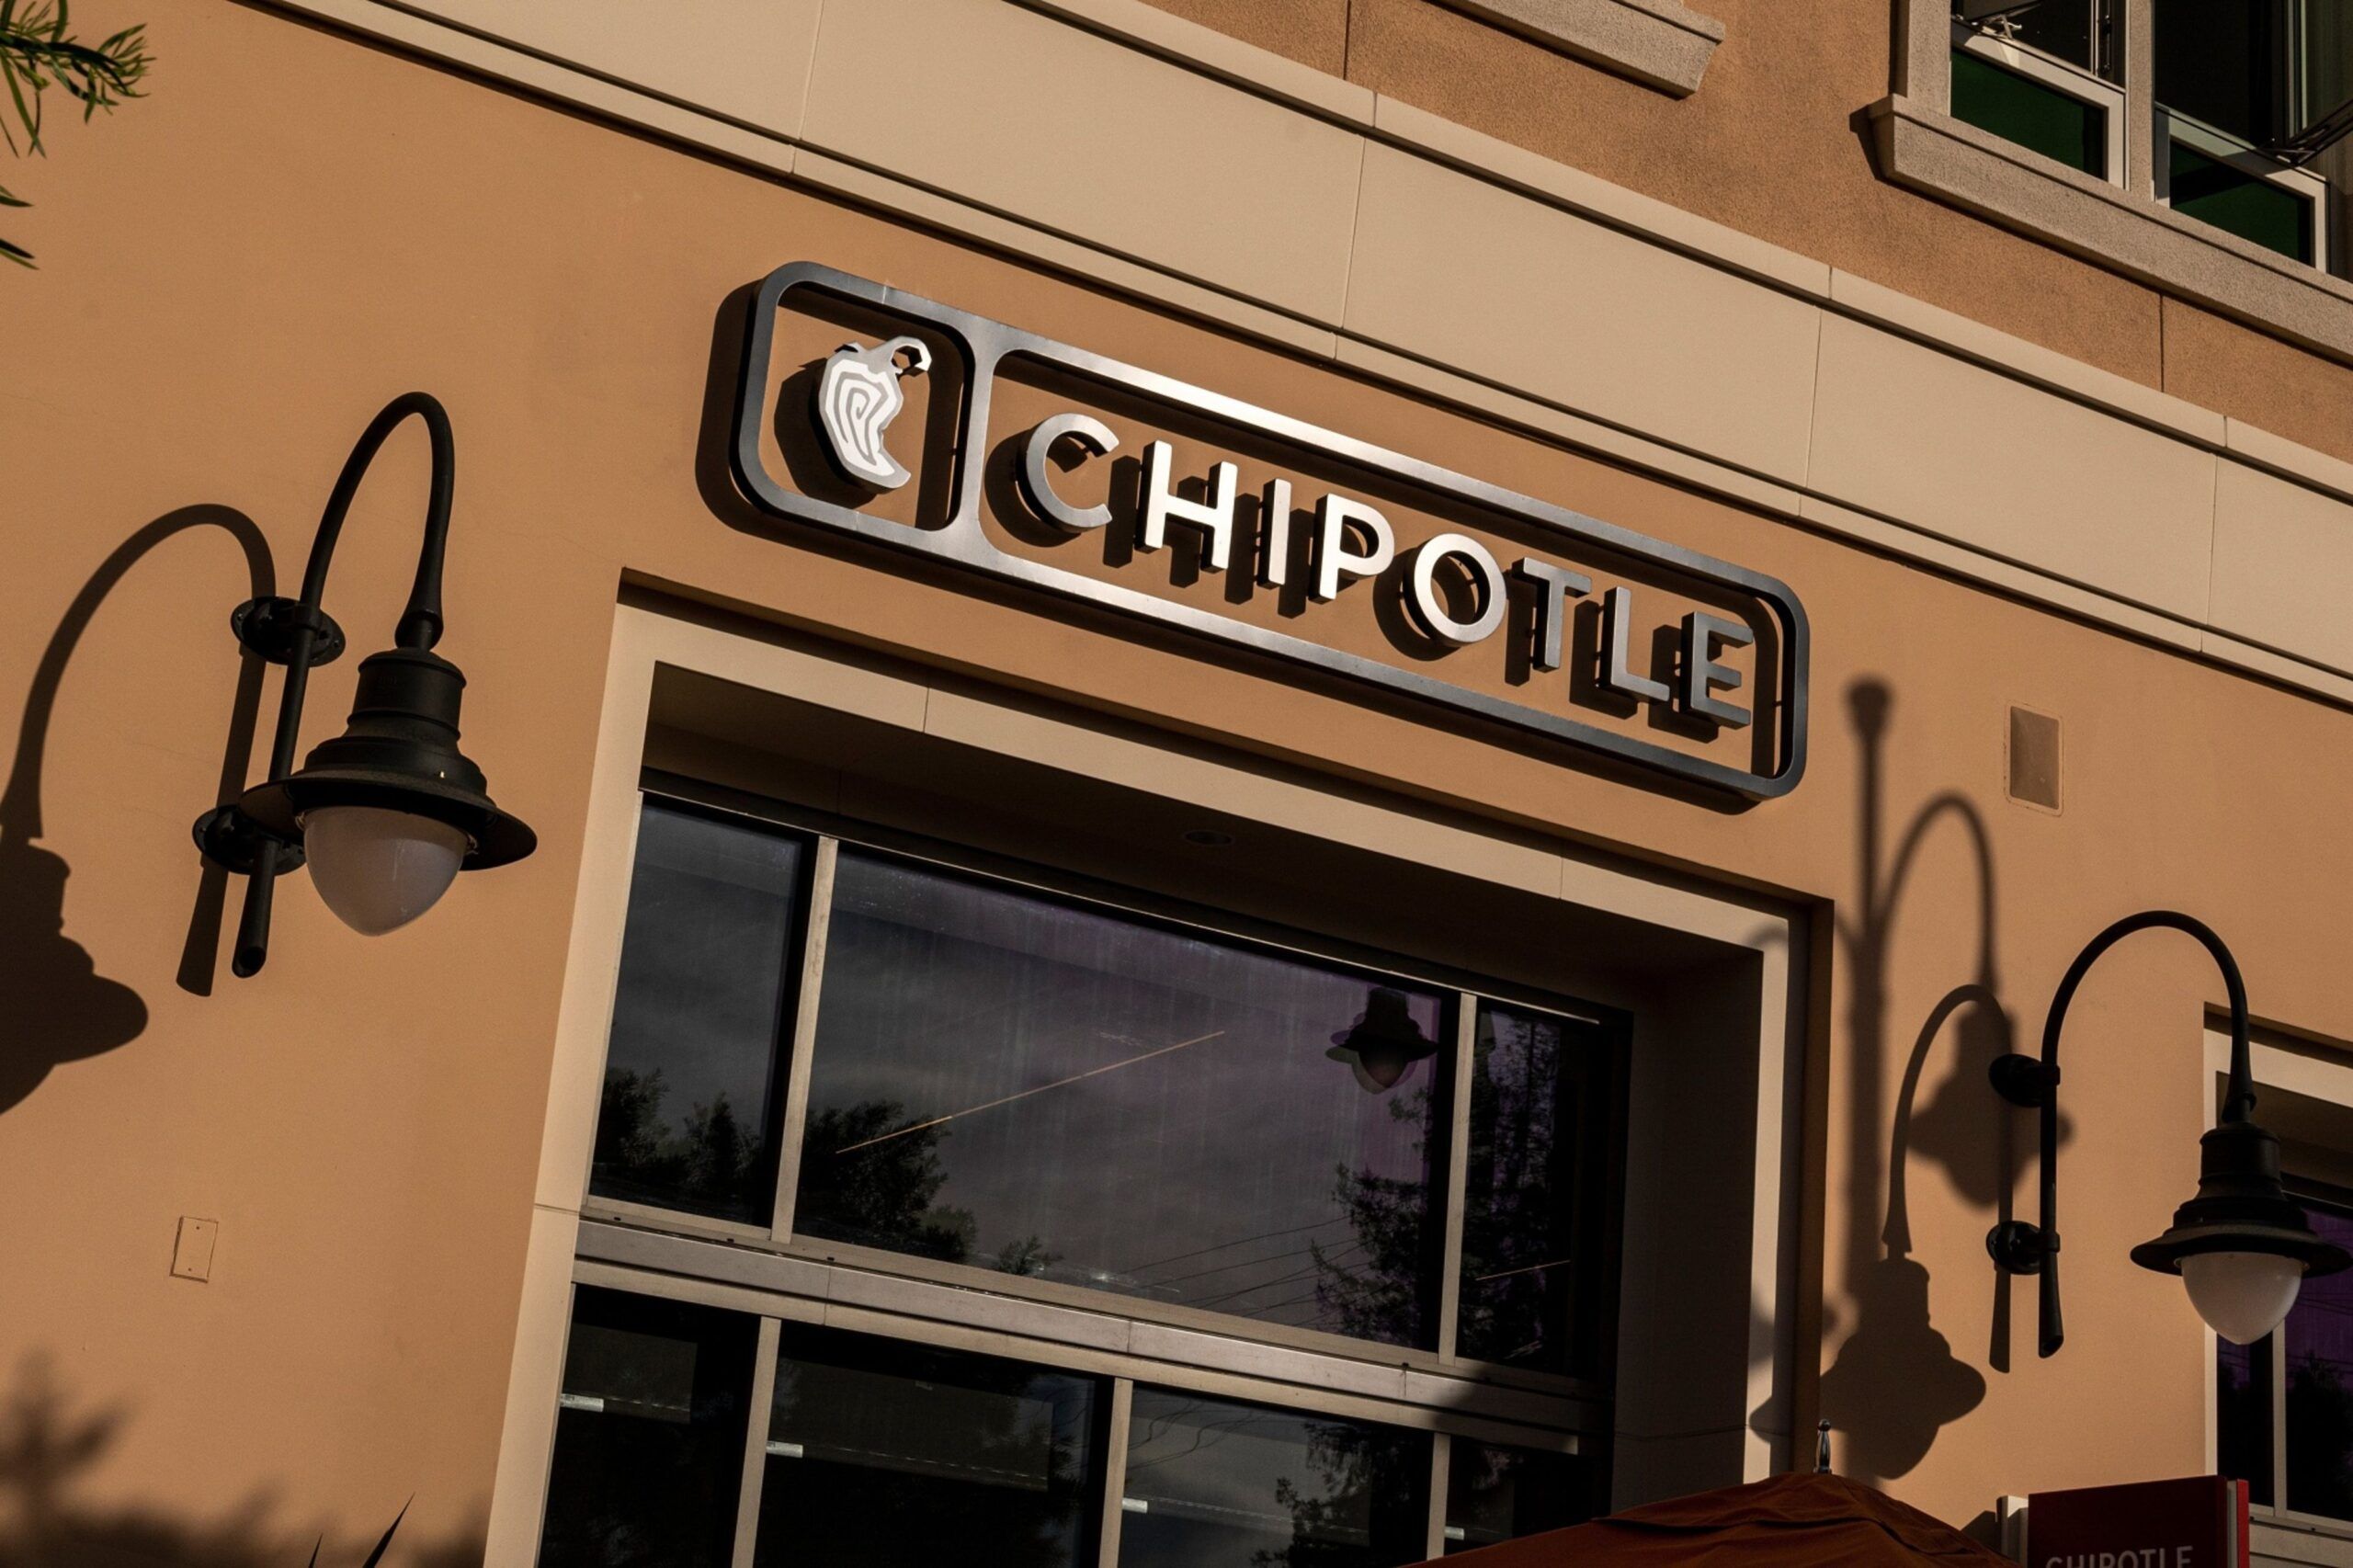 A Chipotle restaurant in Santa Clara, California, U.S., on Tuesday, Oct. 19, 2021. Chipotle Mexican Grill Inc. is scheduled to release earnings figures on Oct. 21. Photographer: David Paul Morris/Bloomberg